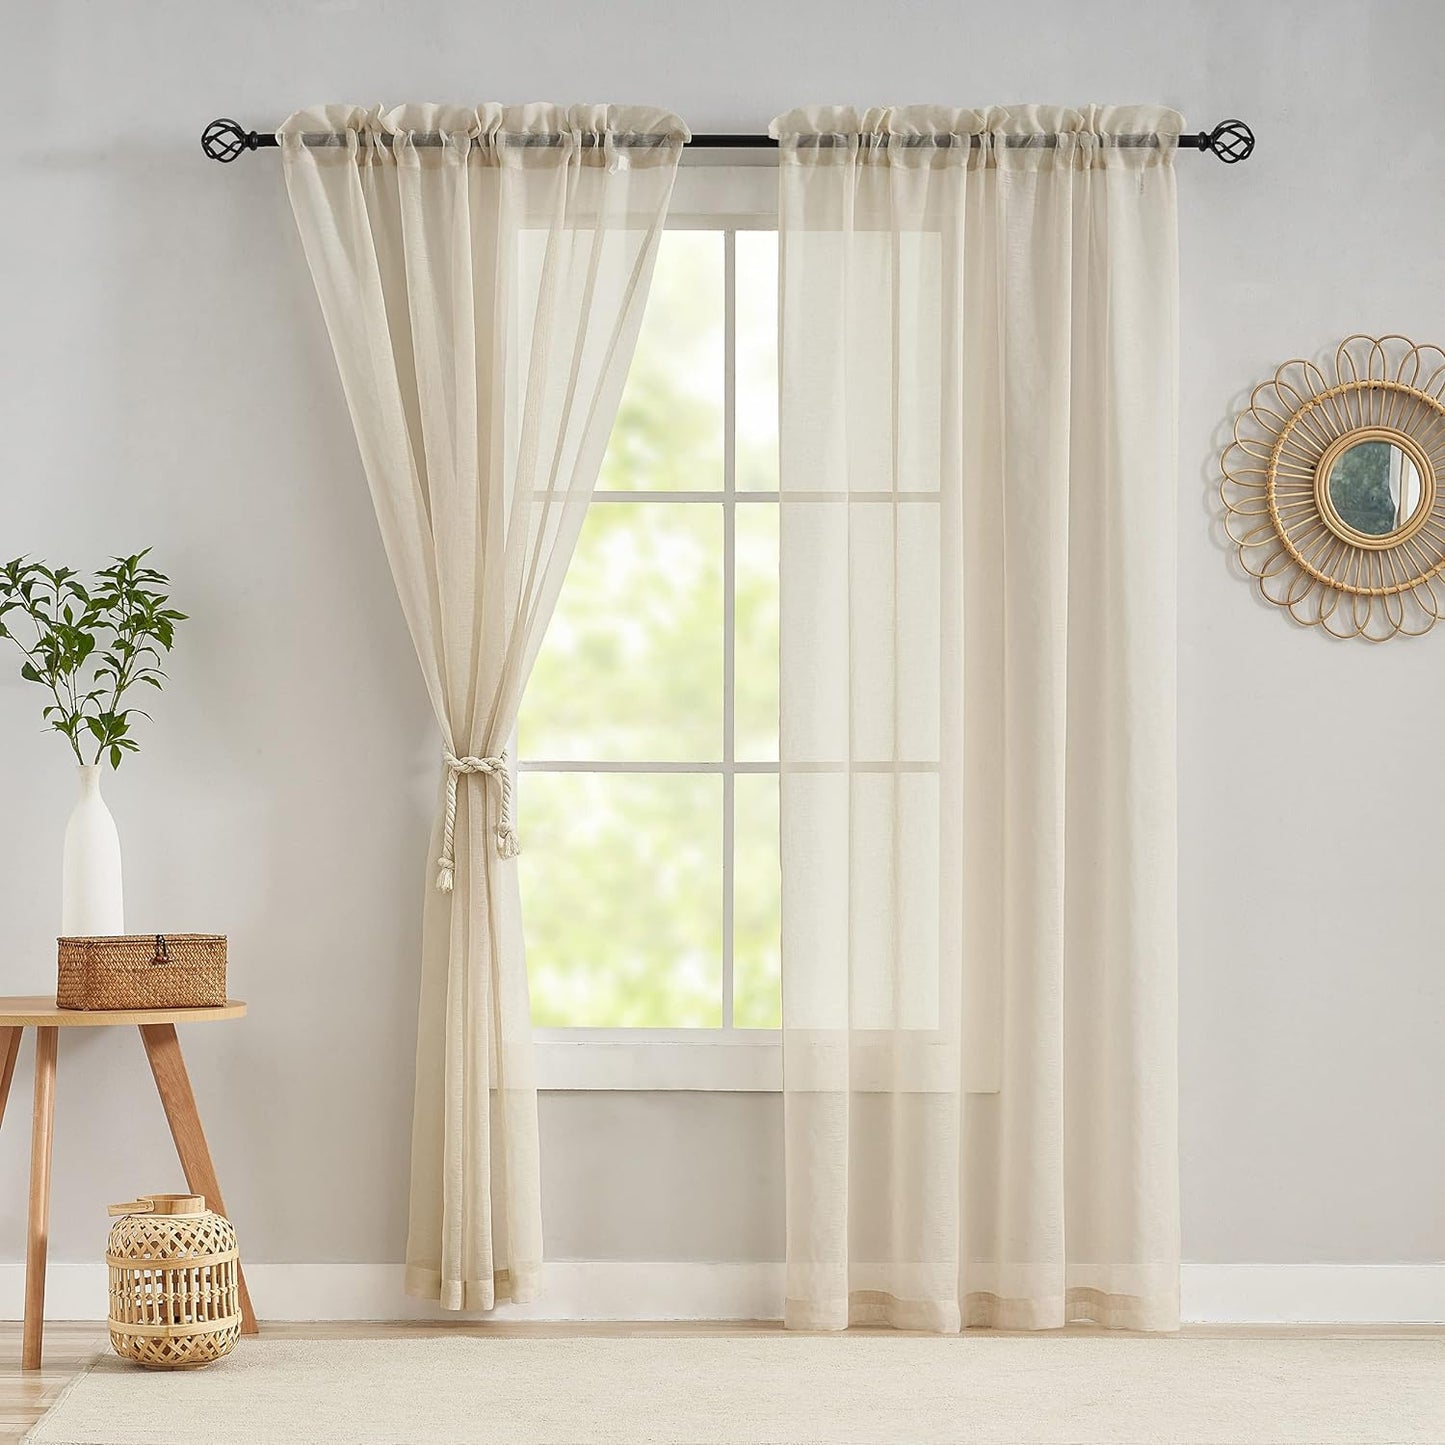 Demetex Sheer Linen Curtains 72 Inches Long Natrual Semi Sheer Curtain Decorative Panels for Living Room Bedroom Porch Window Dressing, 54 X 72 Inches, 2 Pieces, Beige  Demetex Sheer Linen W 54"X L 84" 